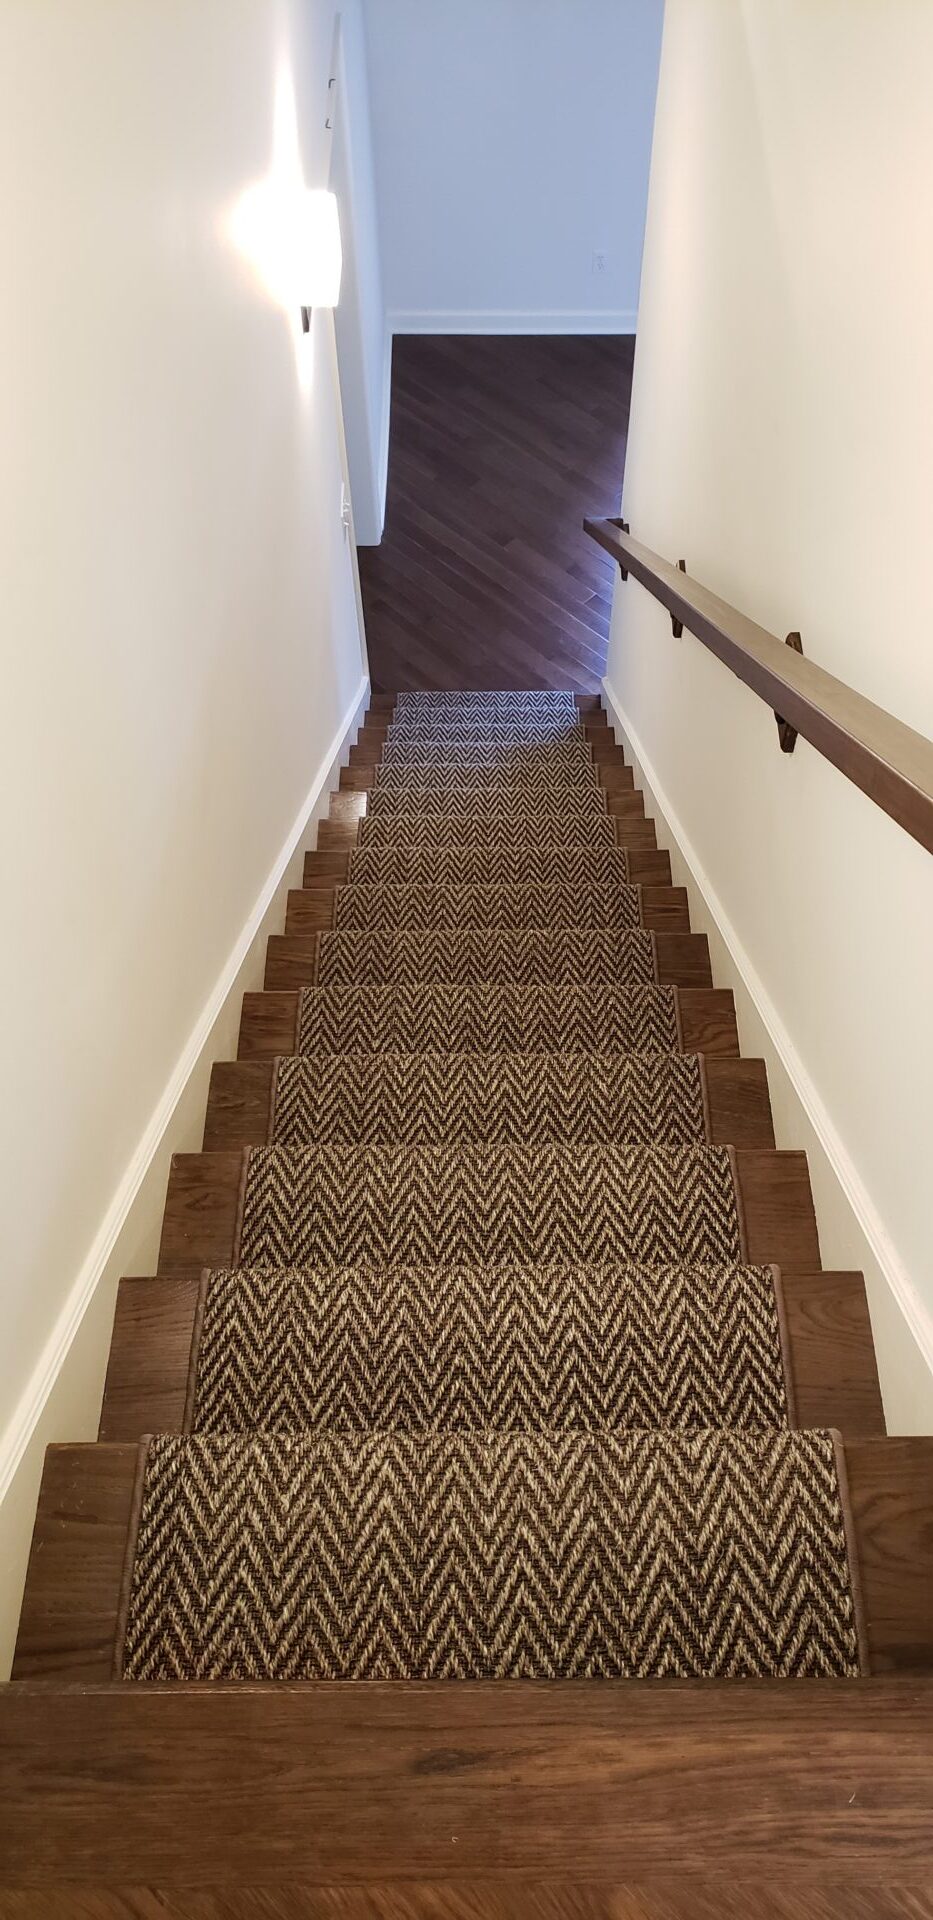 A staircase with brown carpet and wooden handrail.